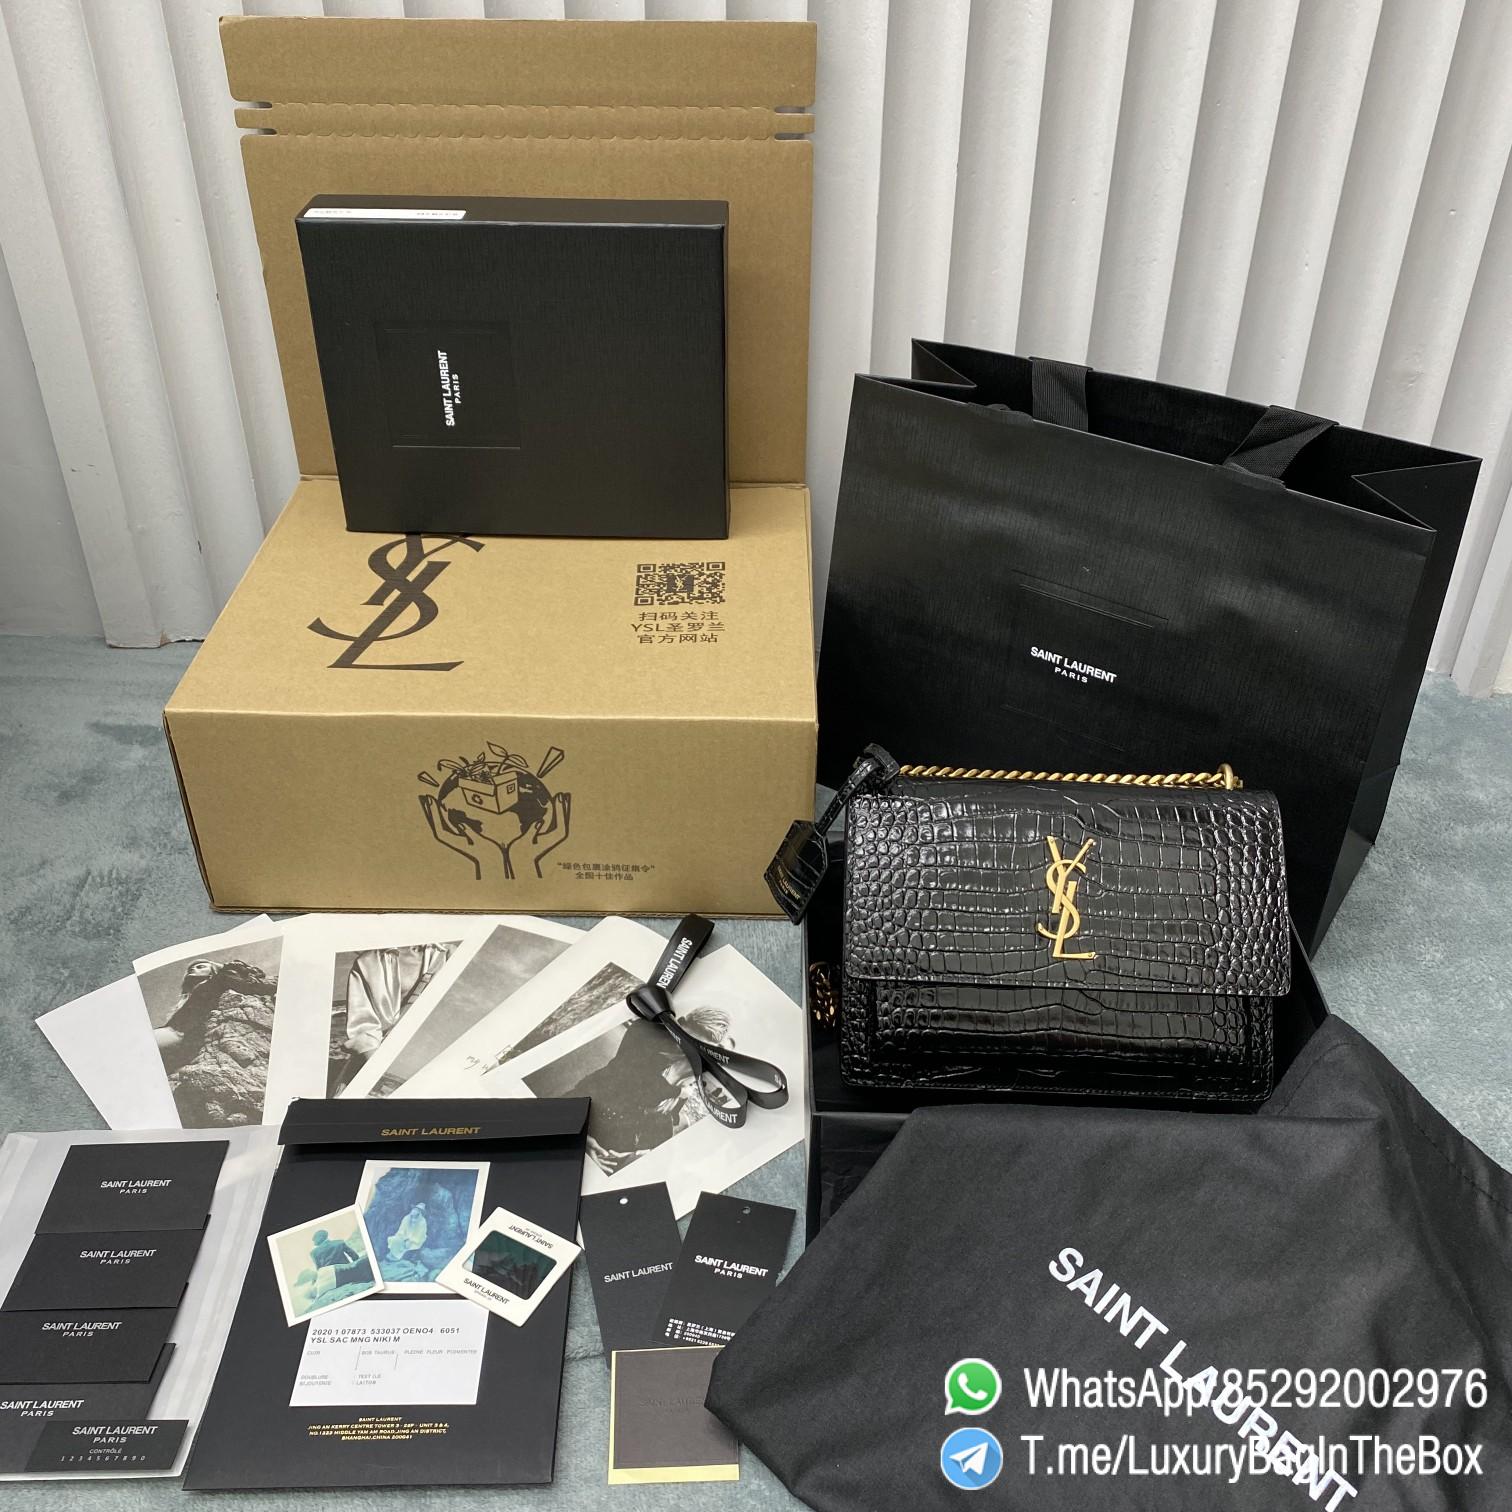 High Quality YSL Sunset In Black Crocodile Embossed Shiny Leather Shoulder Bag with Front Flap Chain and Leather Strap Gold Metal YSL Initials SKU 442906DND0J1000 011